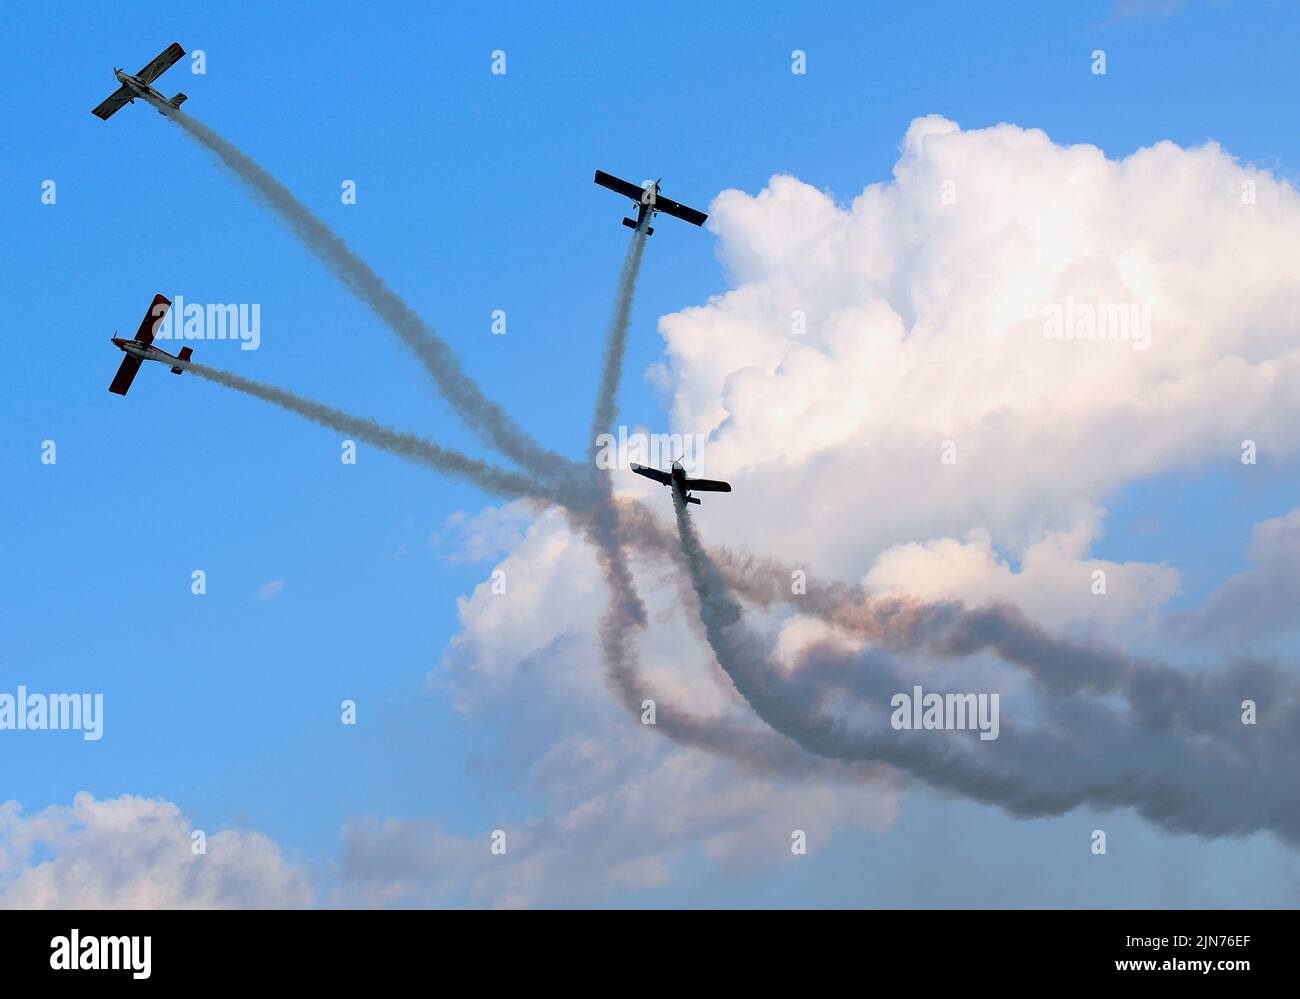 Aviation holiday 'I choose the sky', dedicated to the Day of the Russian Air Force. Show by light aircraft in the sky.  06.08.2022 Russia, Tatarstan, Kazan Photo credit: Danila Egorov/Kommersant/Sipa USA Stock Photo